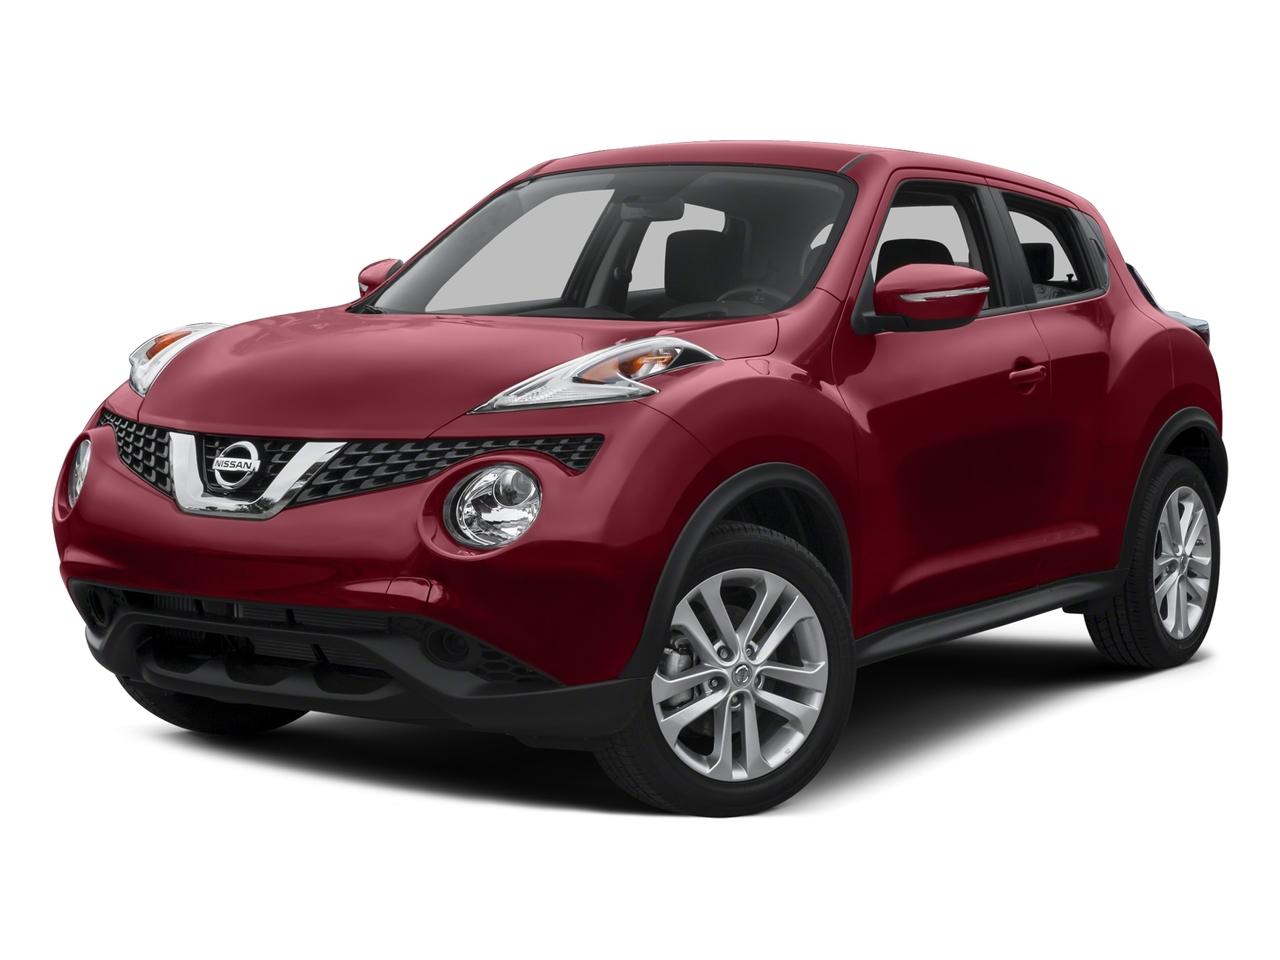 Used, Certified Nissan Vehicles for Sale